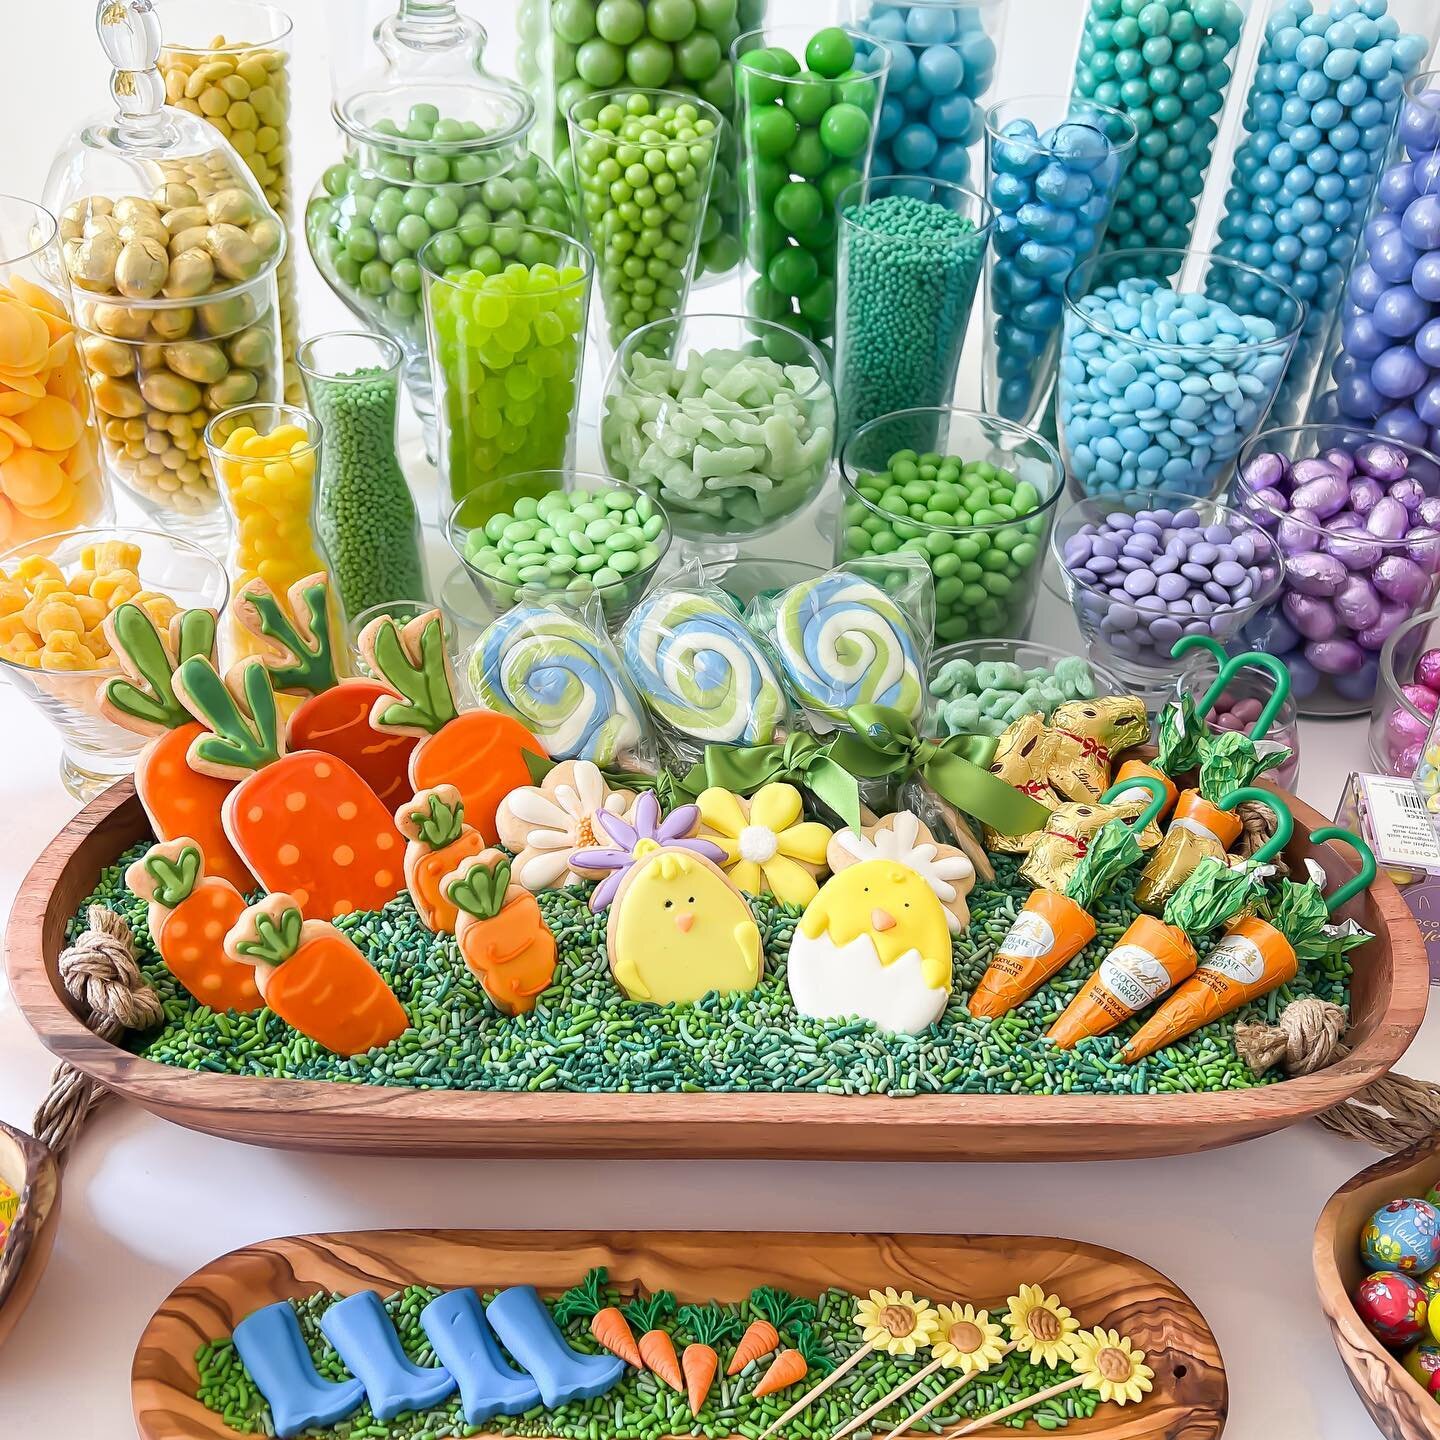 This spring candy assortment has us tasting the rainbow 🌈 ⁣
⁣
⁣
⁣
⁣
#edibleestates #candy #rainbow #springcandy #njfood